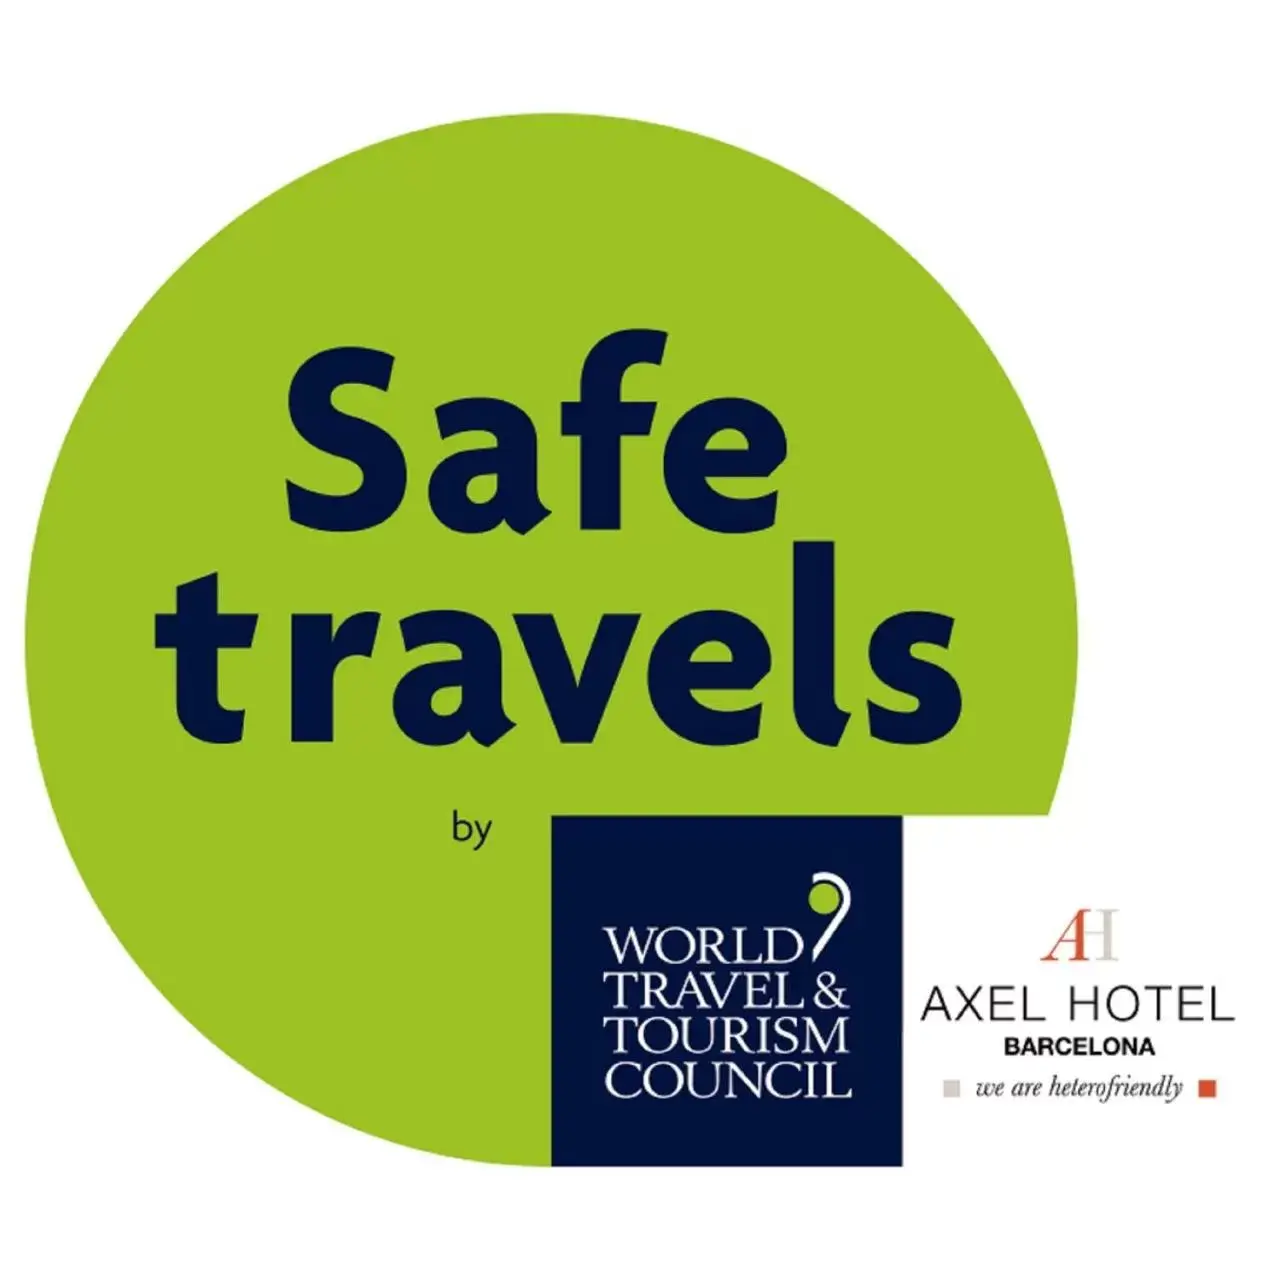 Certificate/Award in Axel Hotel Barcelona & Urban Spa- Adults Only